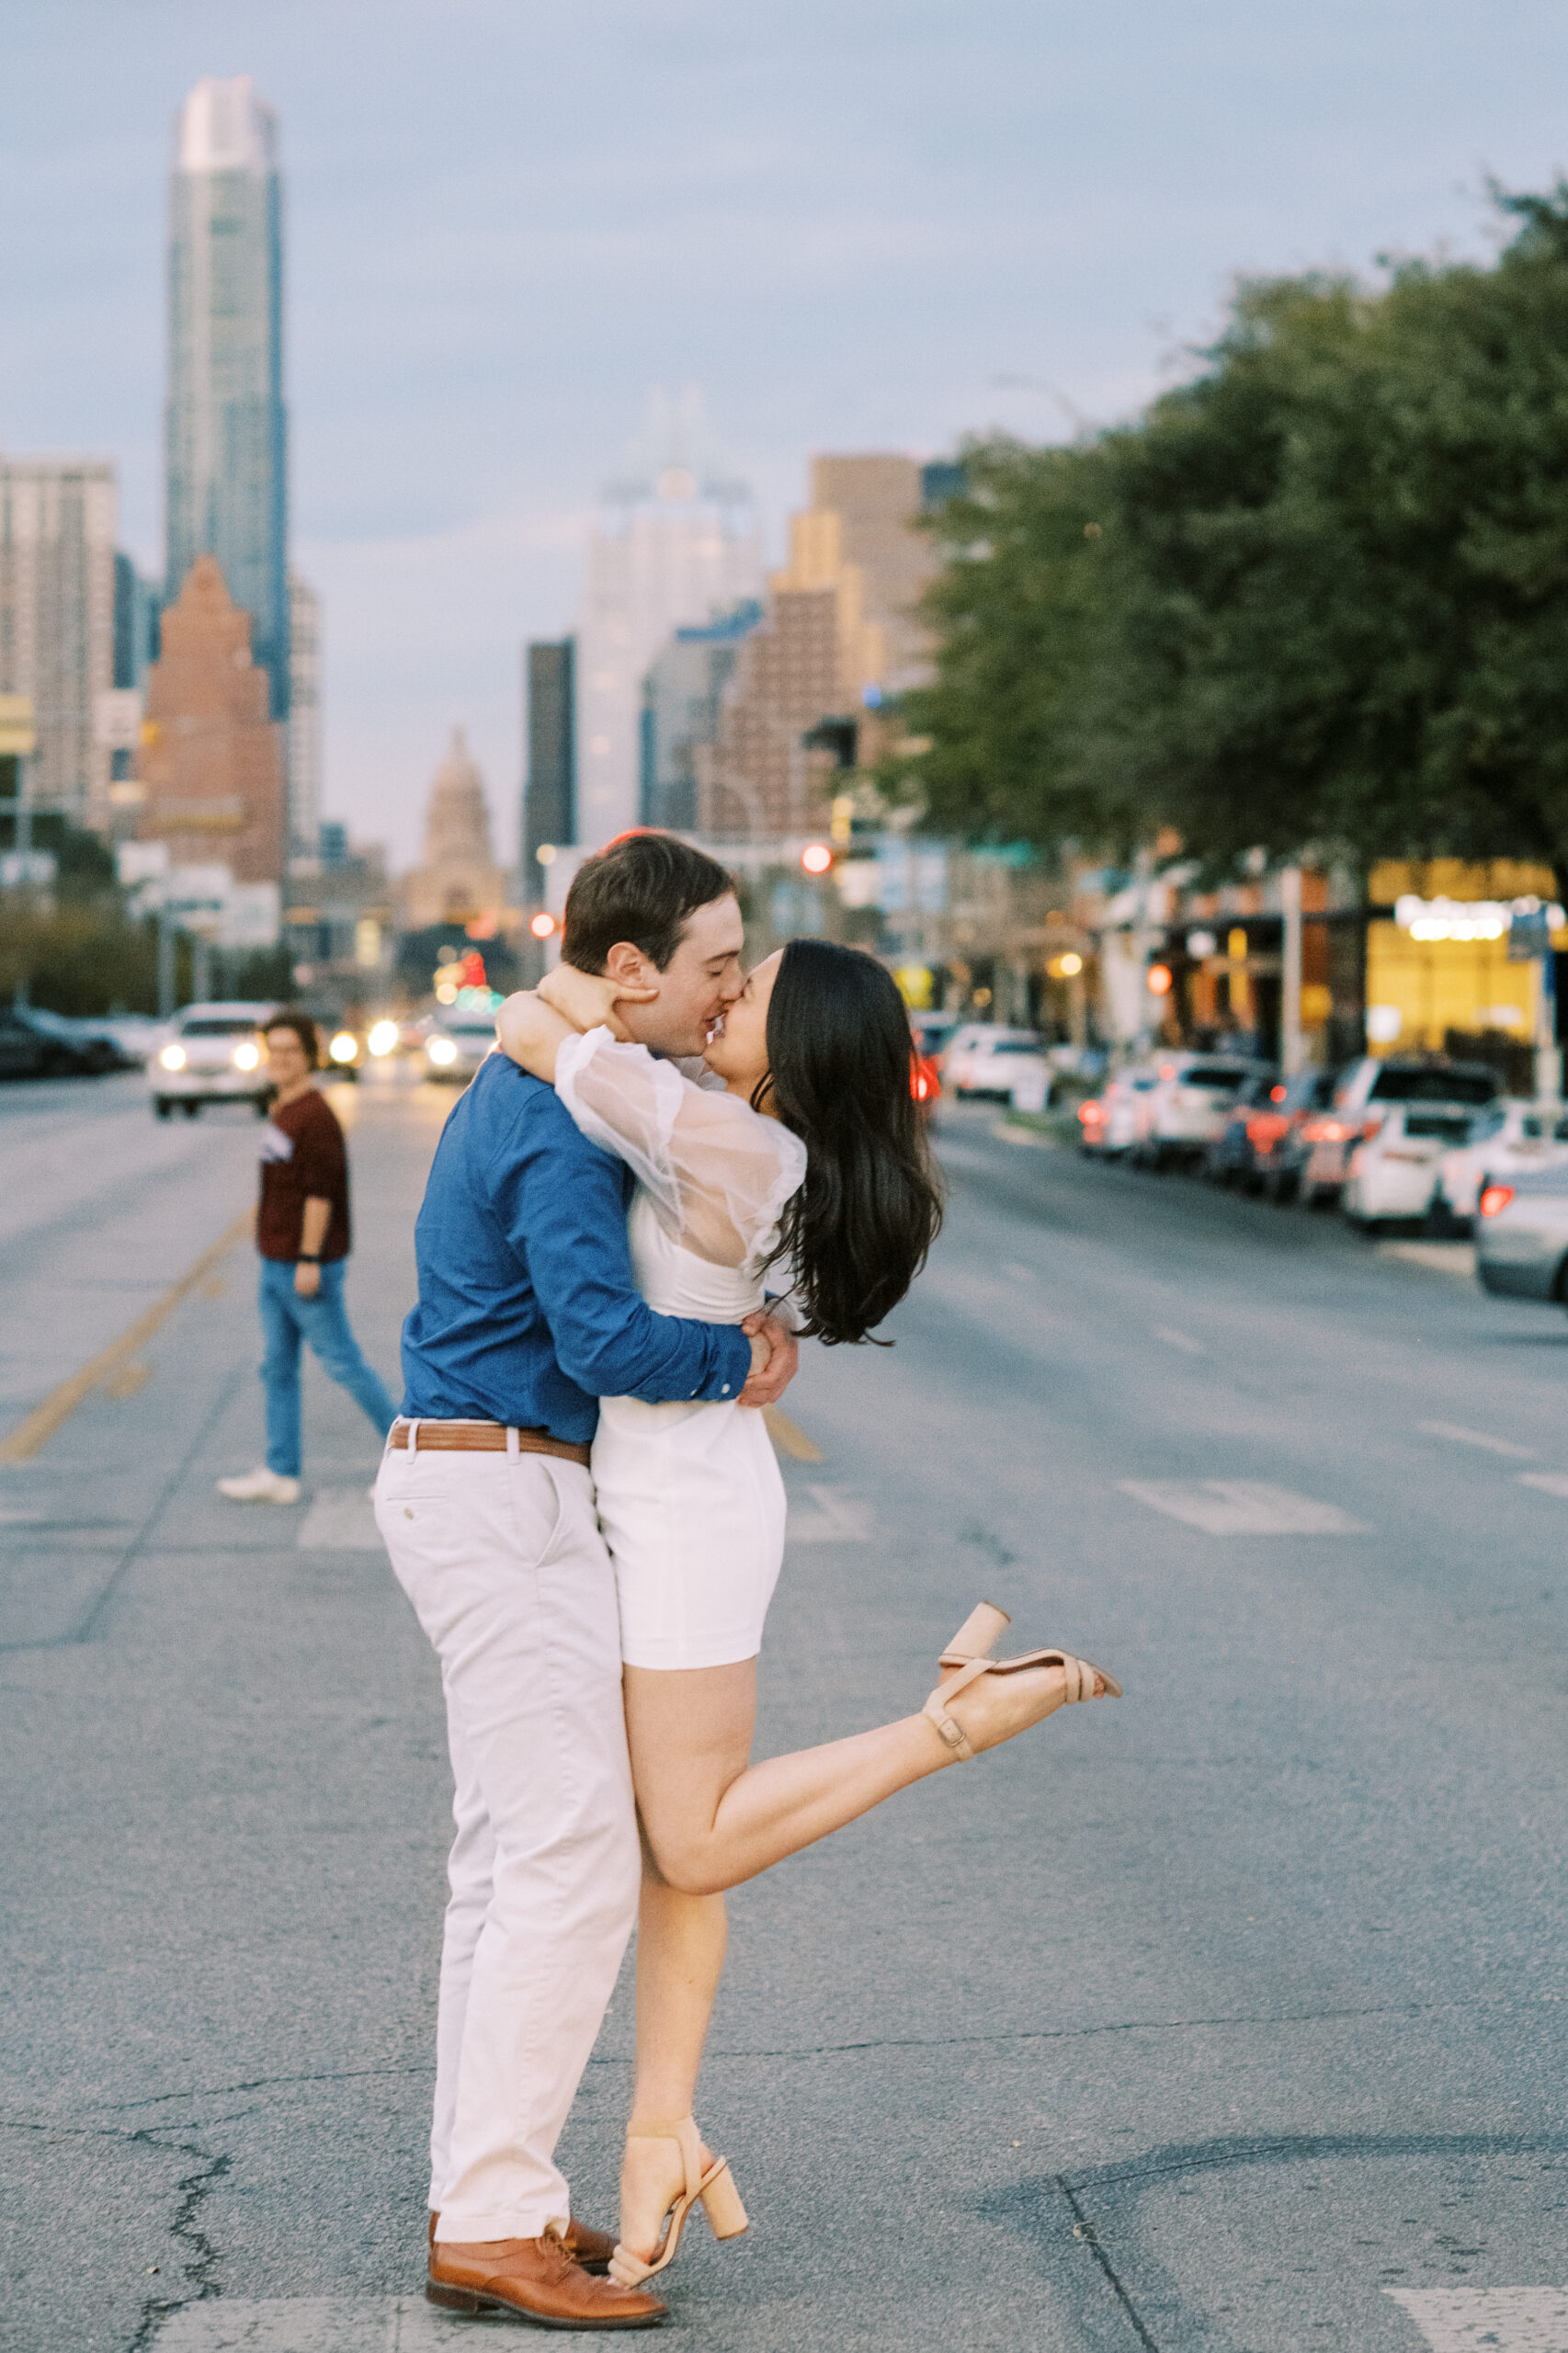 Engagement Session on South Congress in Austin, Texas.